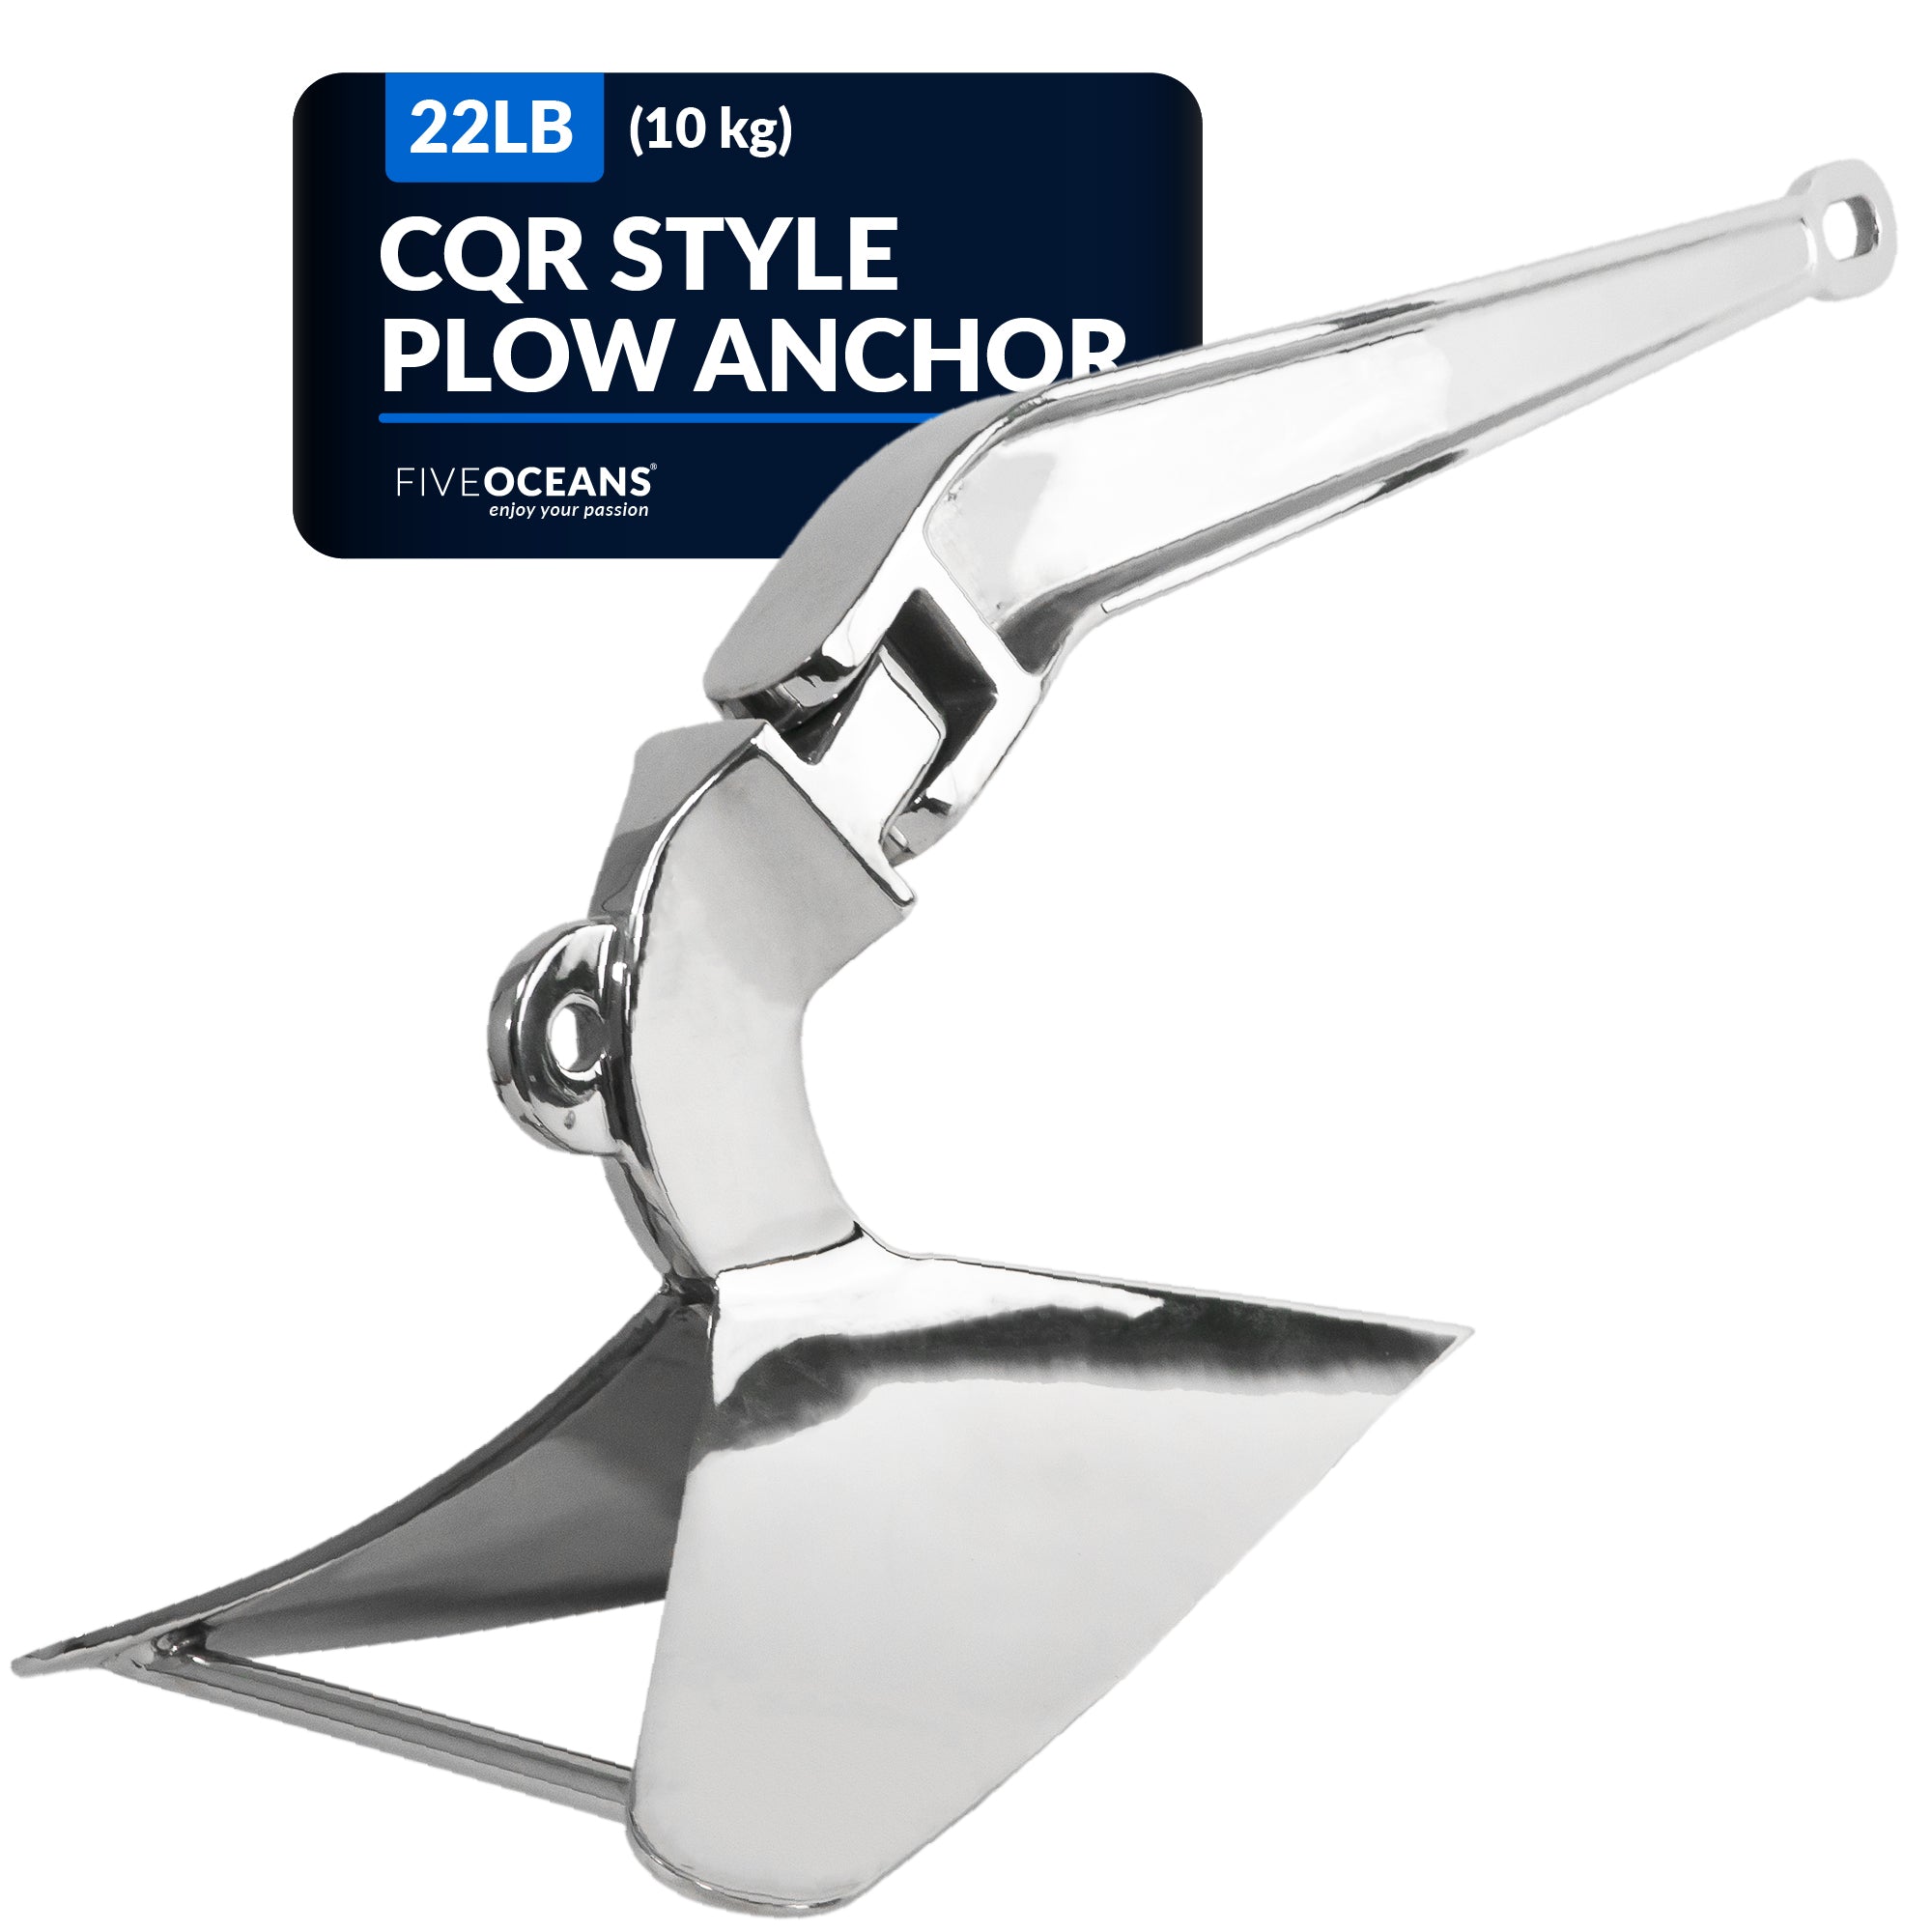 CQR Style Plow Anchor,  22 Lb / 10 Kg, Stainless Steel - FO345